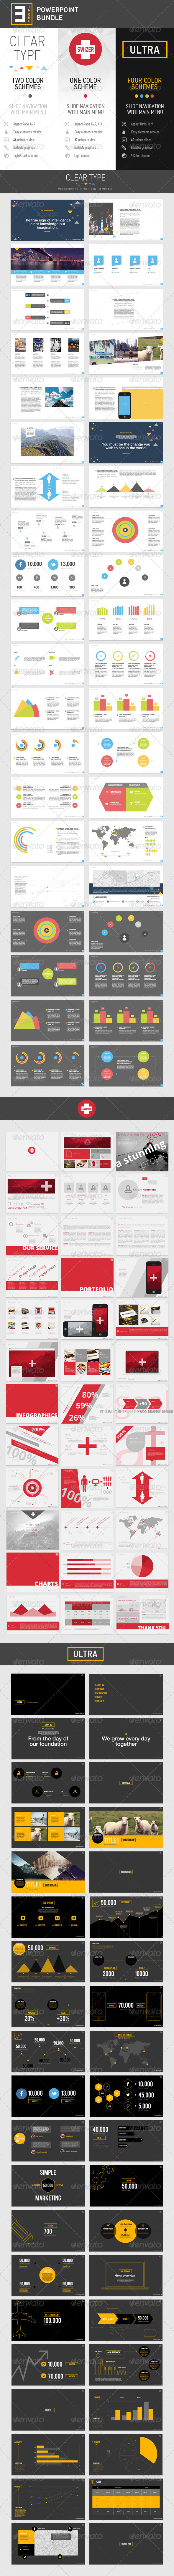 GraphicRiver 3-in-1 PowerPoint Bundle 7721814